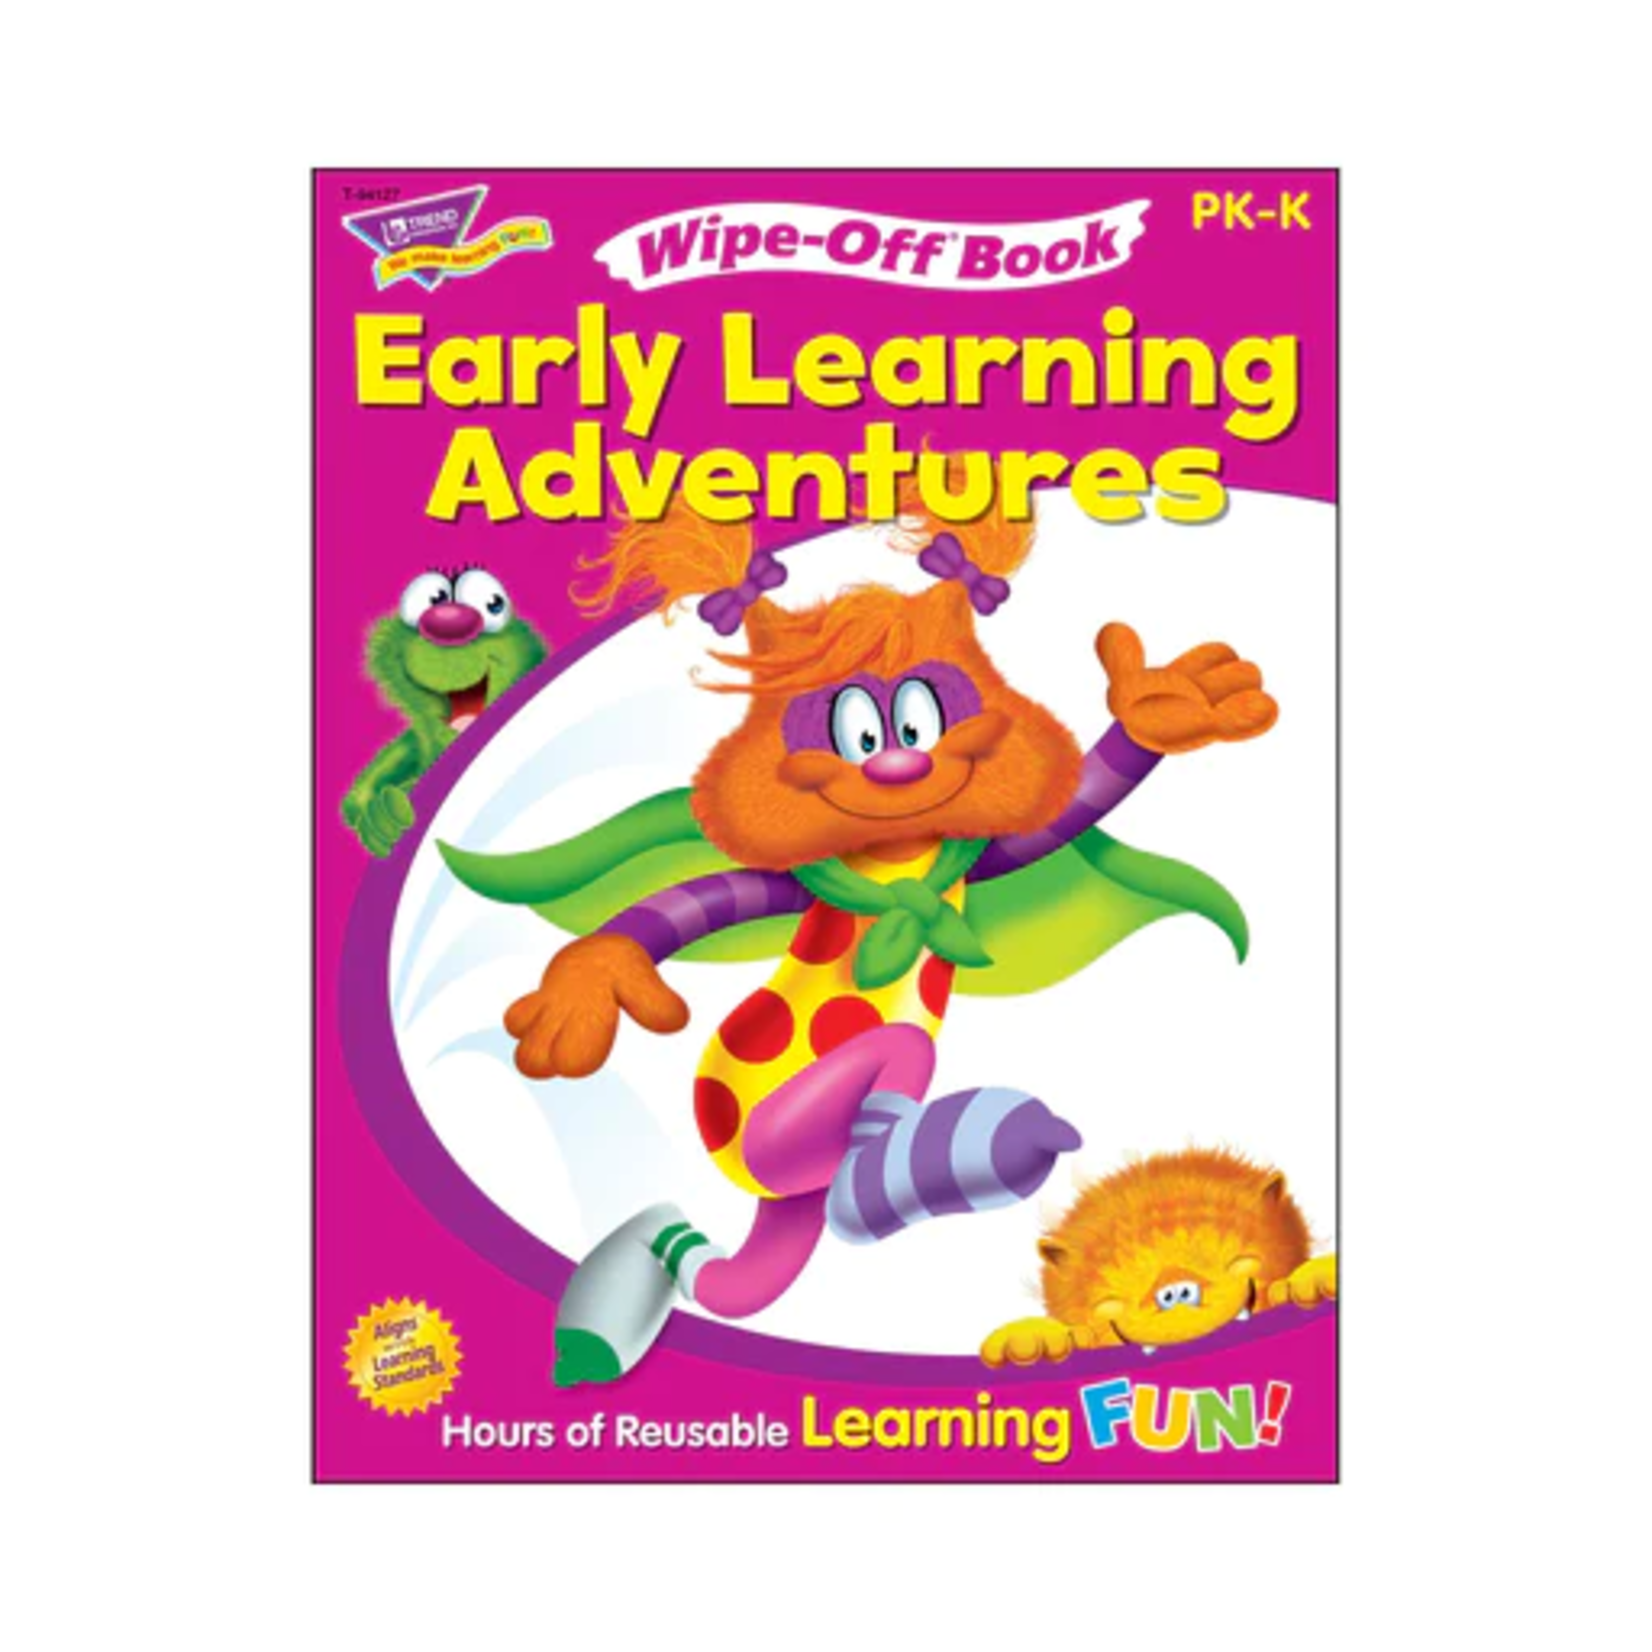 TREND ENTERPRISES INC Early Learning Adventures Wipe-Off® Book